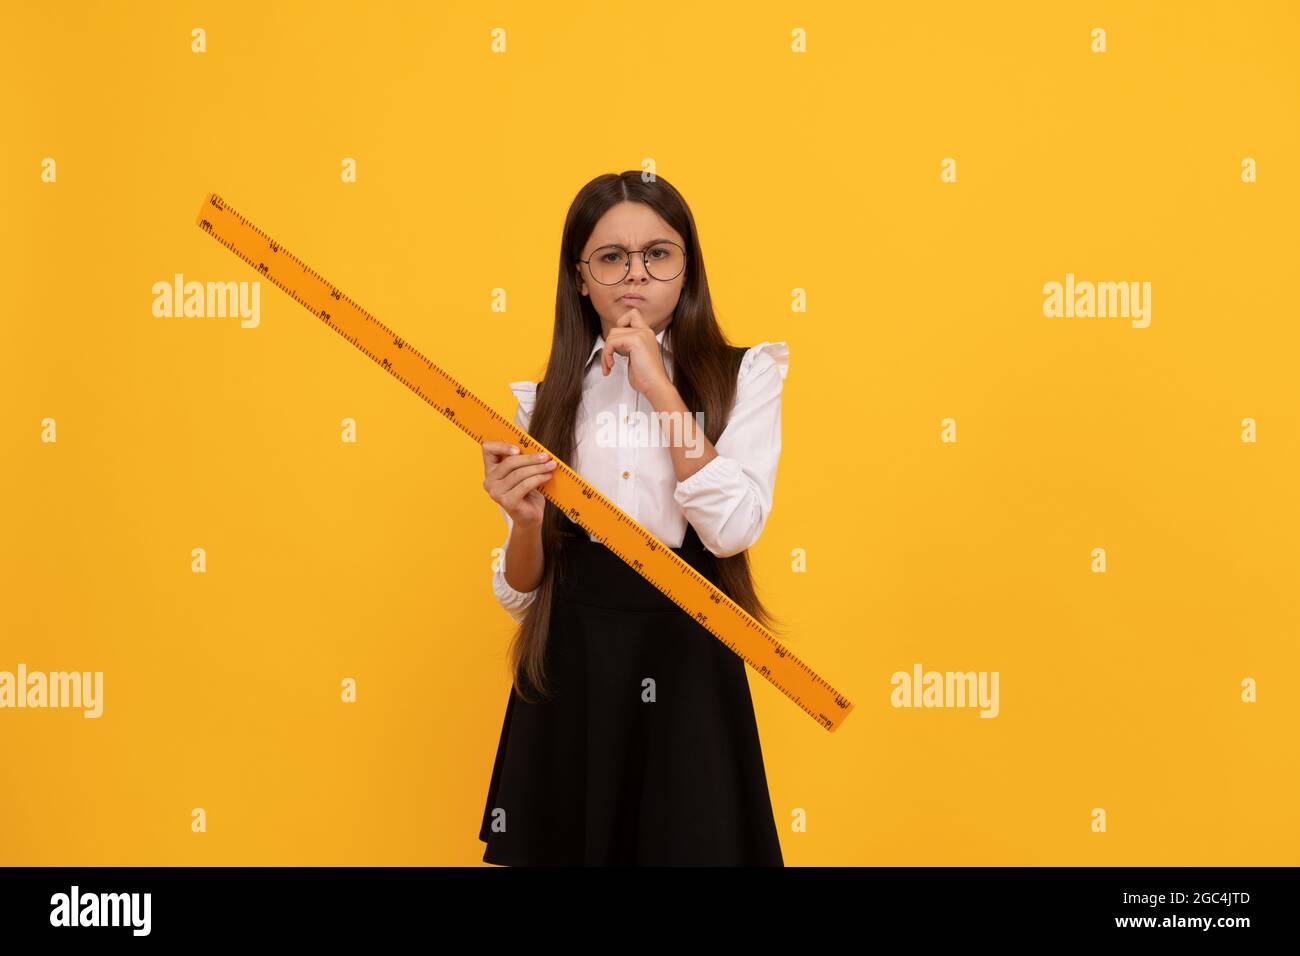 thinking teen girl in school uniform and glasses hold mathematics ruler for measuring, geometry Stock Photo